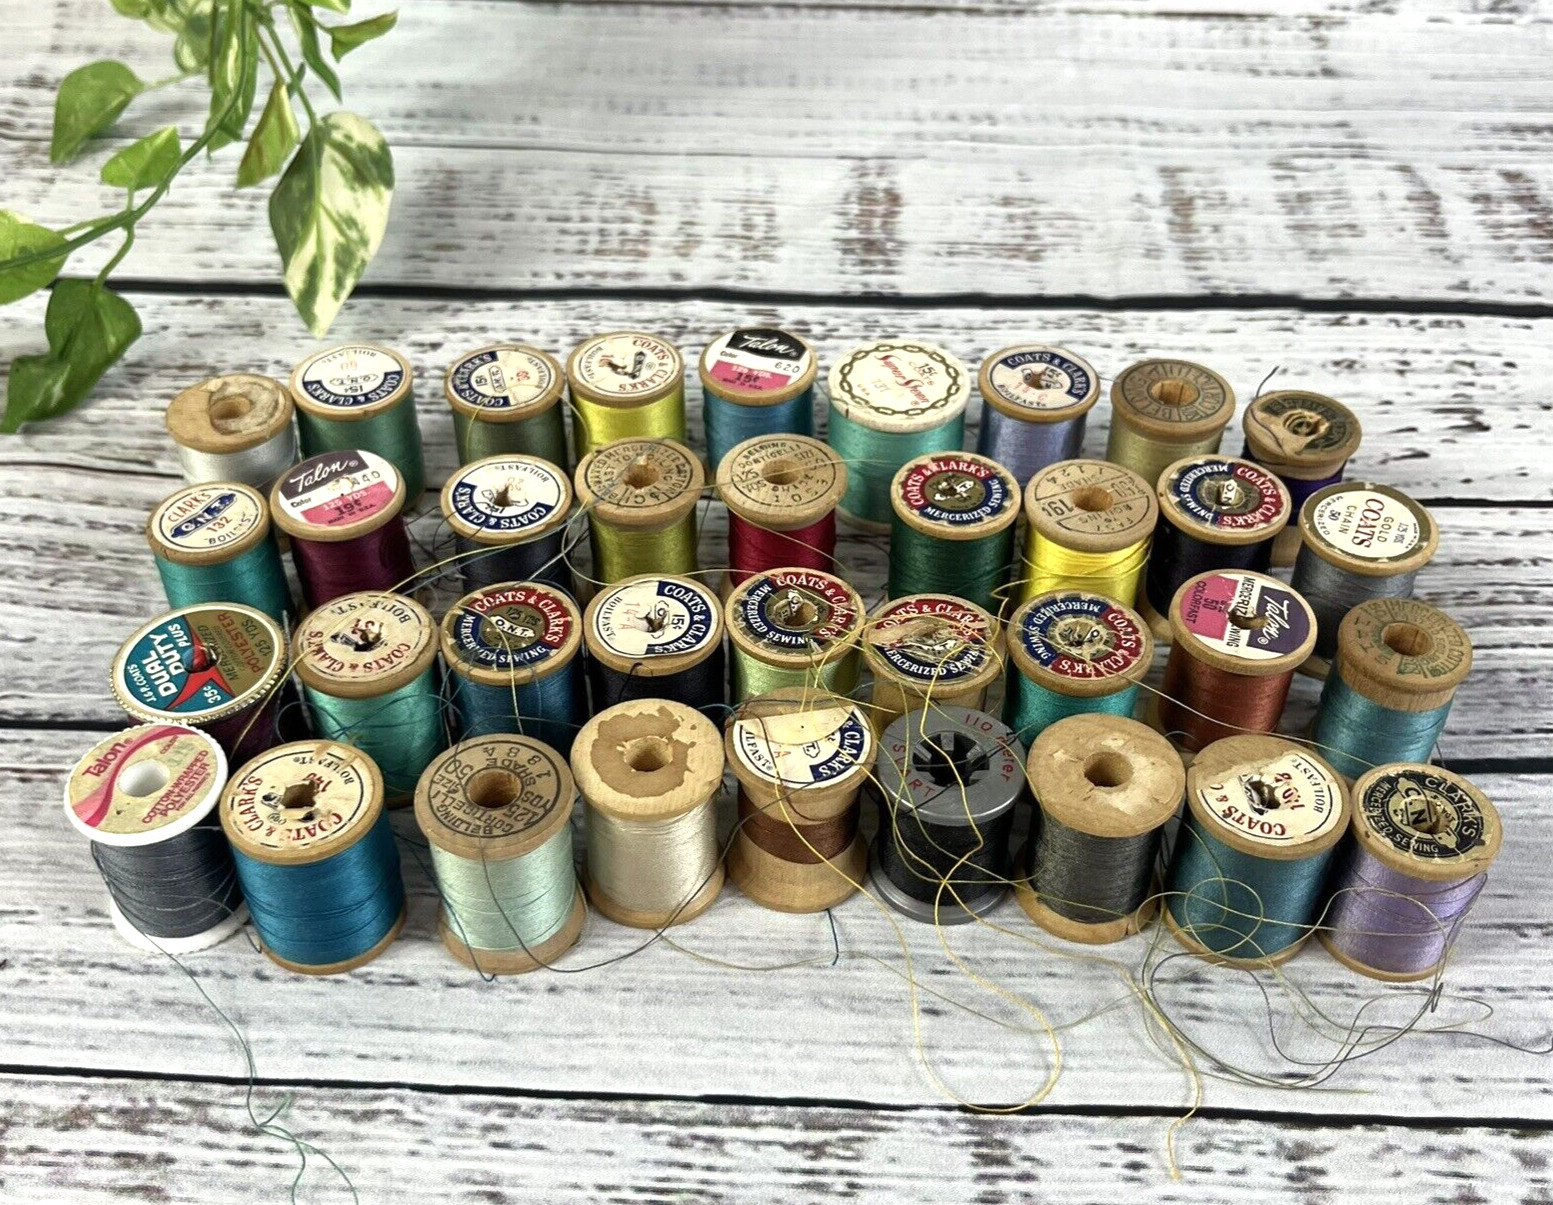 Lot of 36 Vintage Wooden Spools & Thread Variety Crafts Art Collectors Sewing